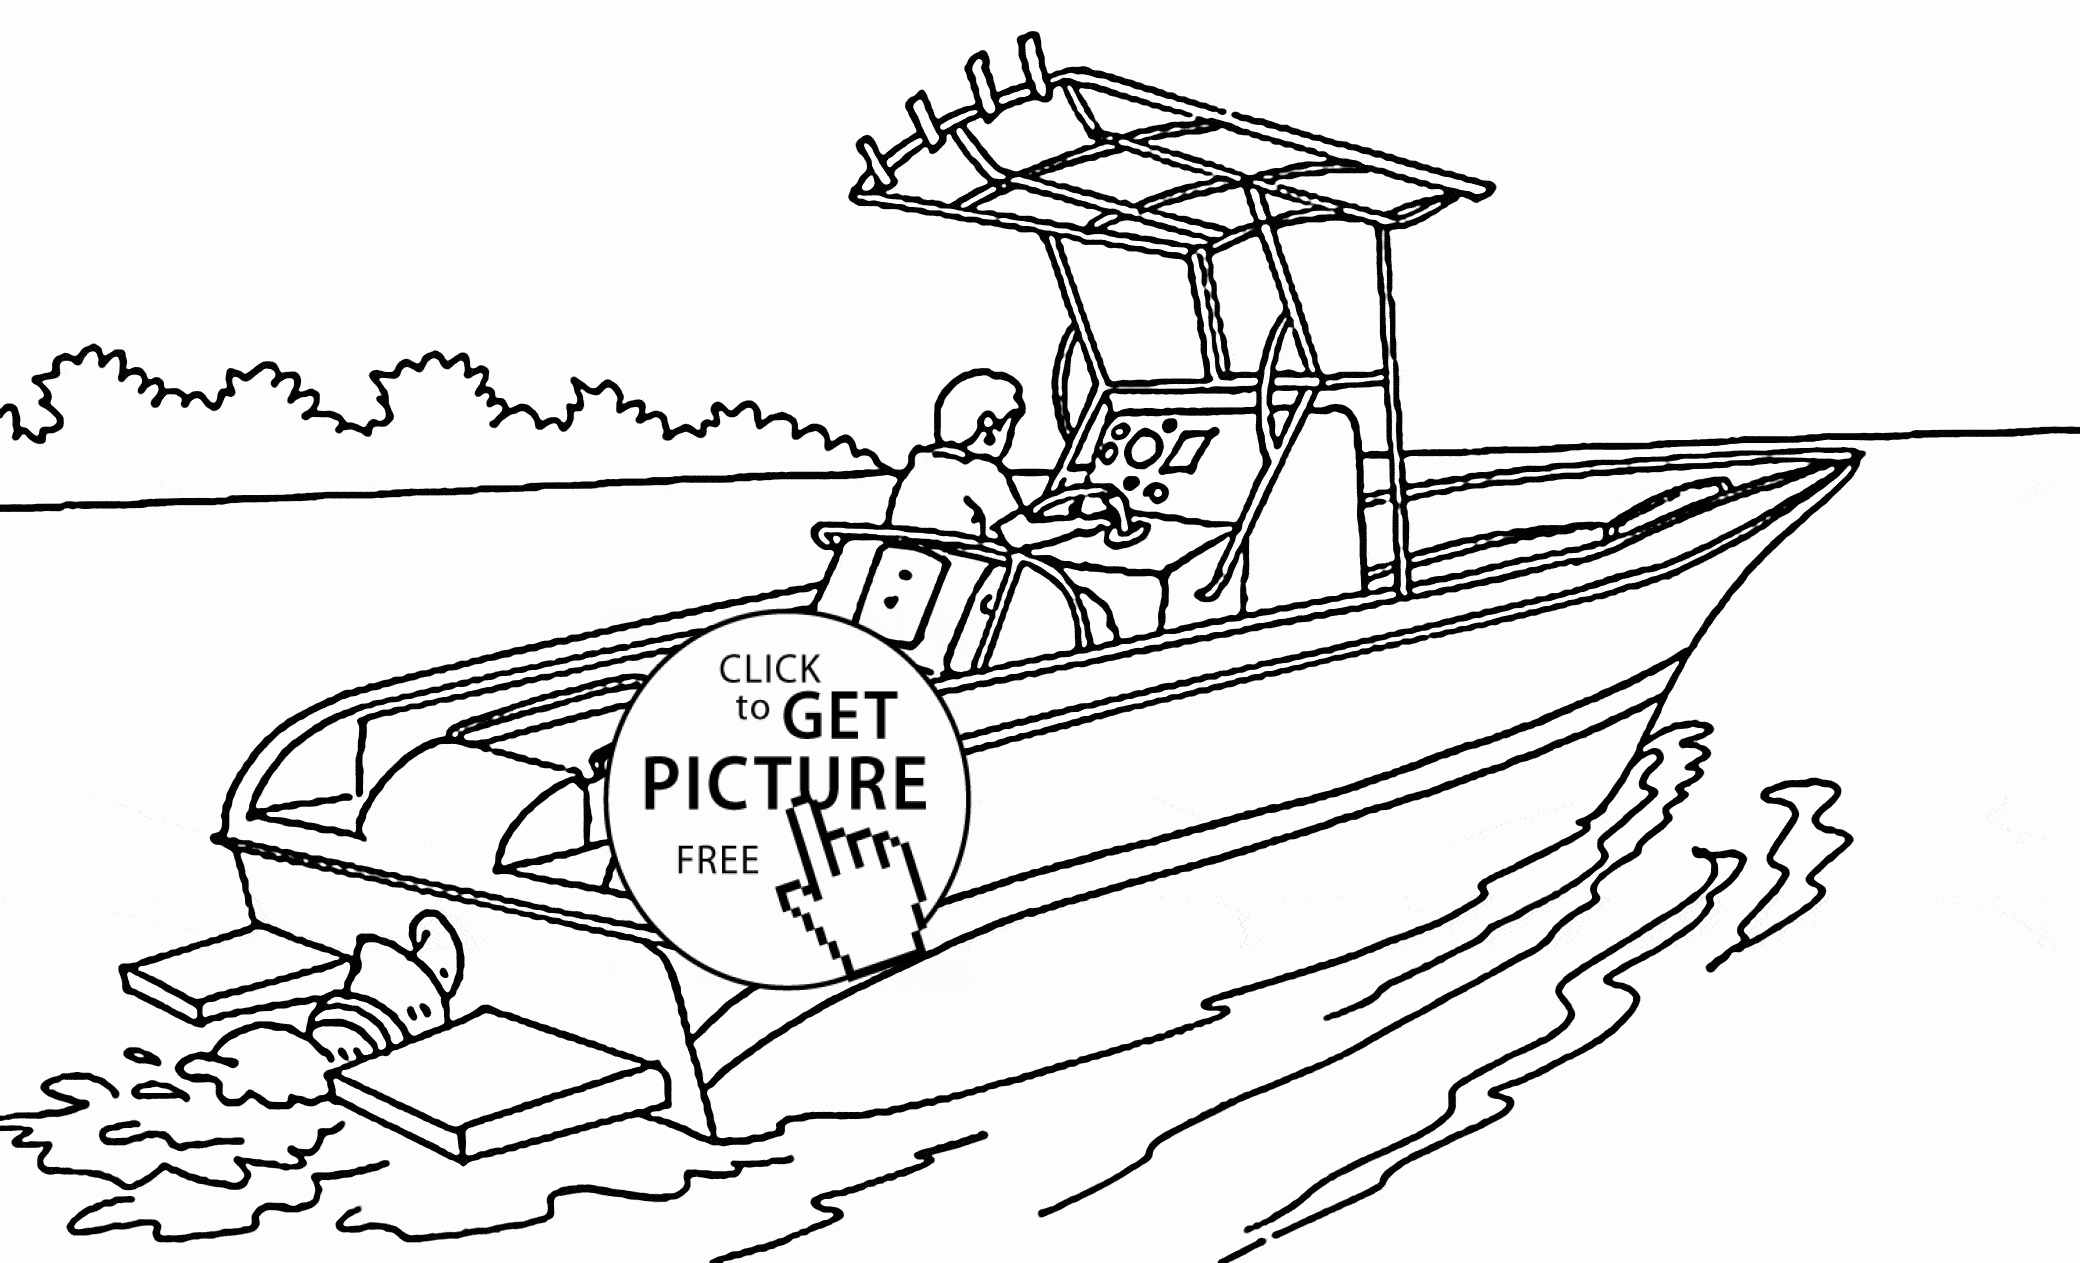 Real Speed Boat coloring page for kids, transportation coloring ...